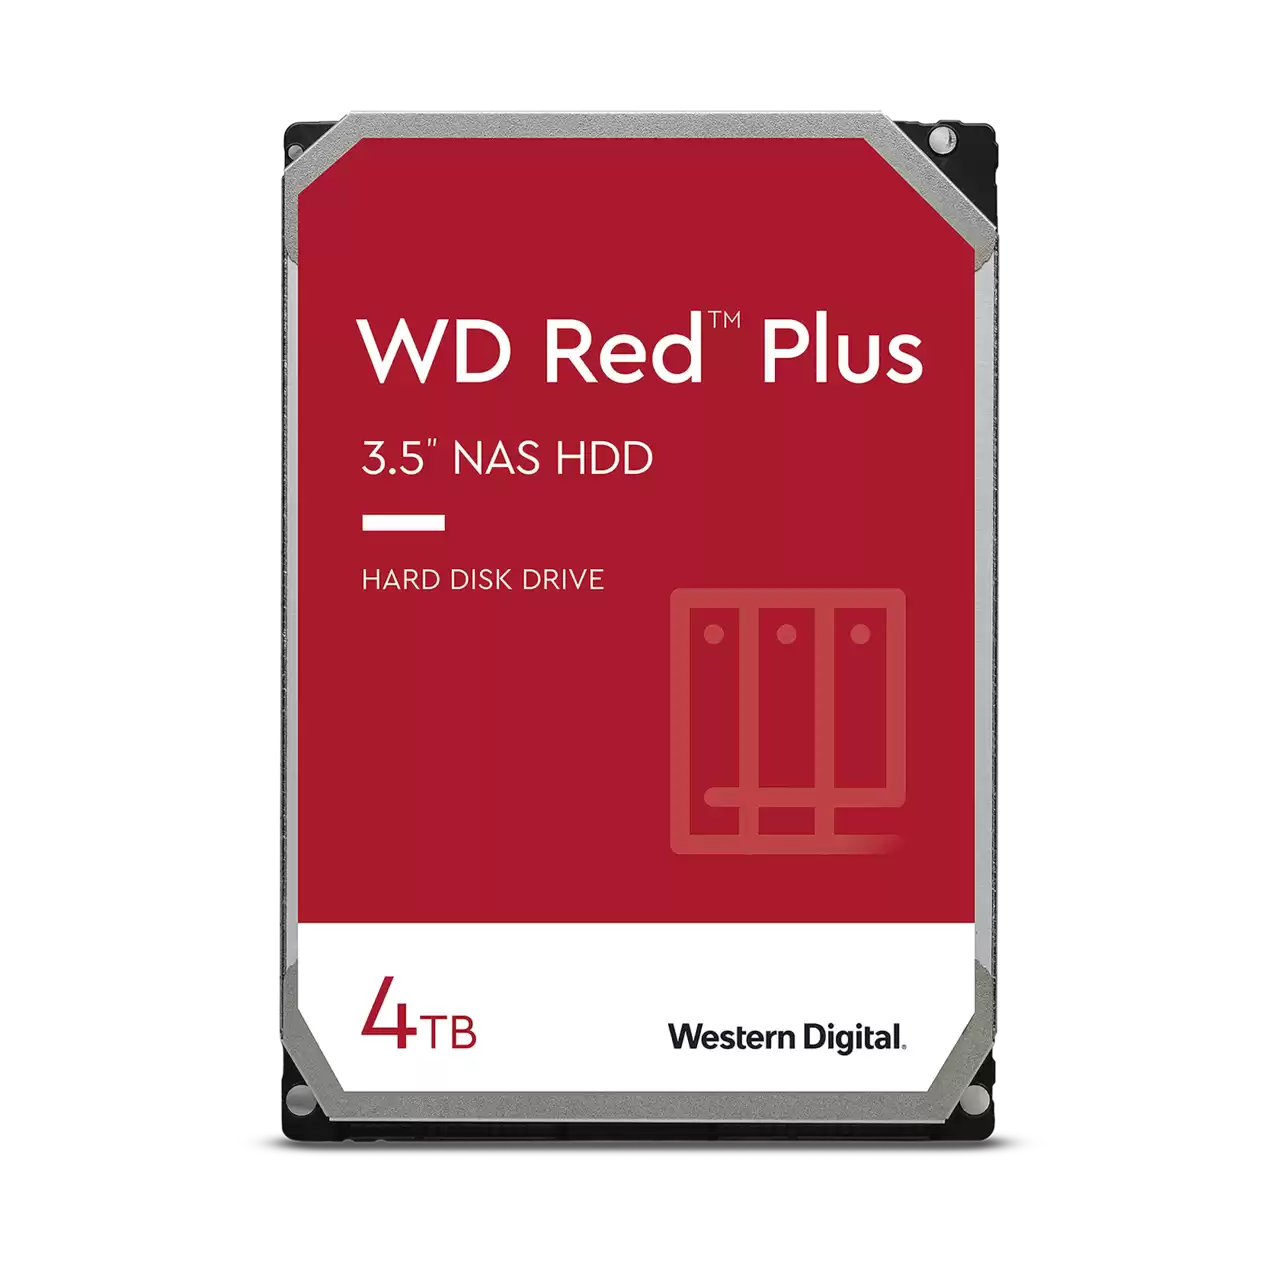 WD Red™ Plus CMR 4TB SATA 3.5 128 MB Cache HDD